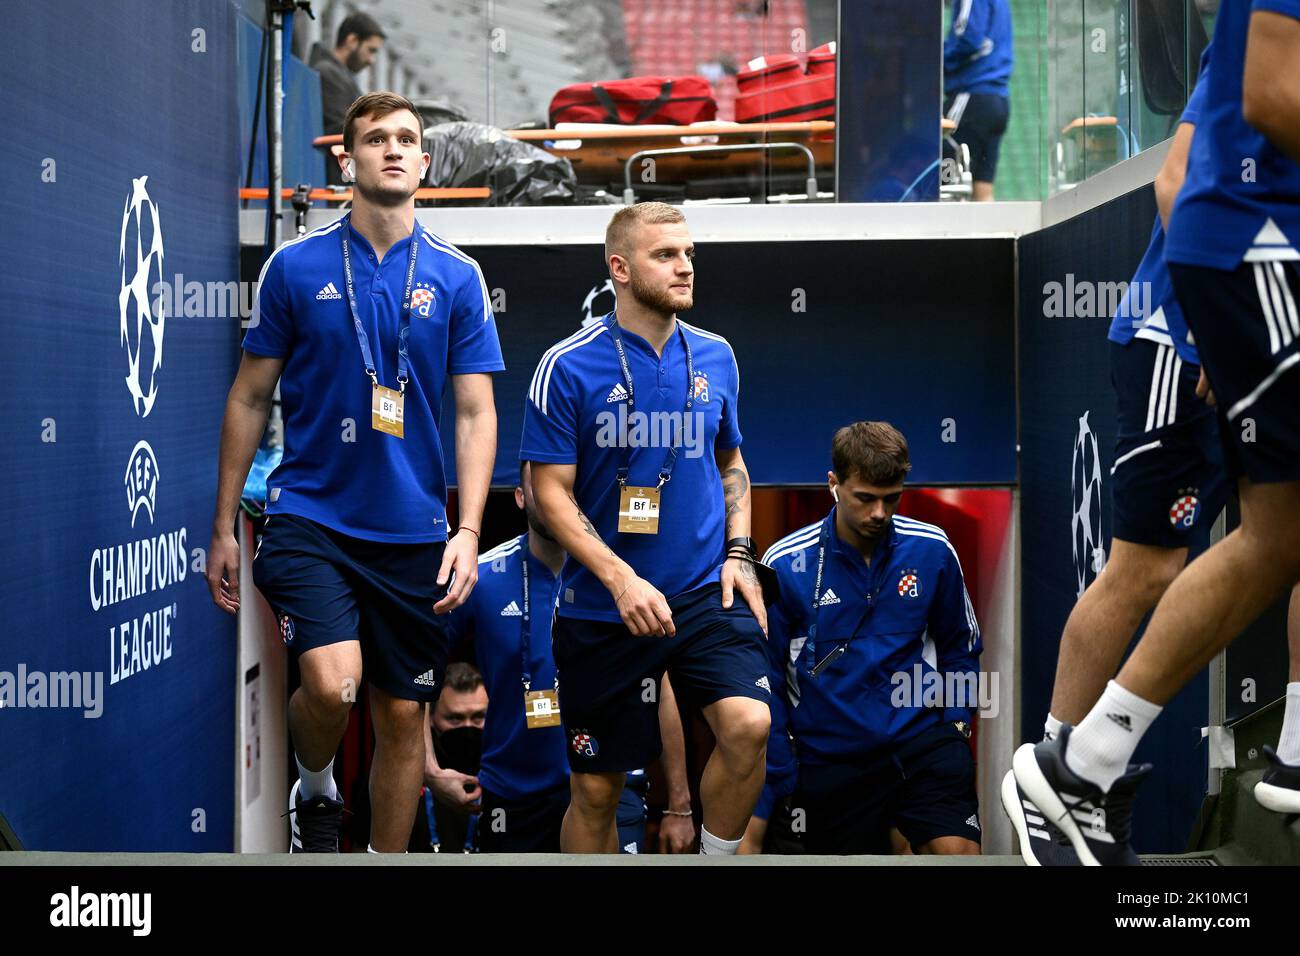 MILAN, ITALY - SEPTEMBER 14: Daniel Stefulj, Petar Bockaj and Dario Spikic of Dinamo Zagreb  make their way out from the tunnel prior to the UEFA Champions League group E match between AC Milan and Dinamo Zagreb at Giuseppe Meazza Stadium on September 14, 2022 in Milan, Italy.  Photo by Marko Lukunic/Pixsell Stock Photo